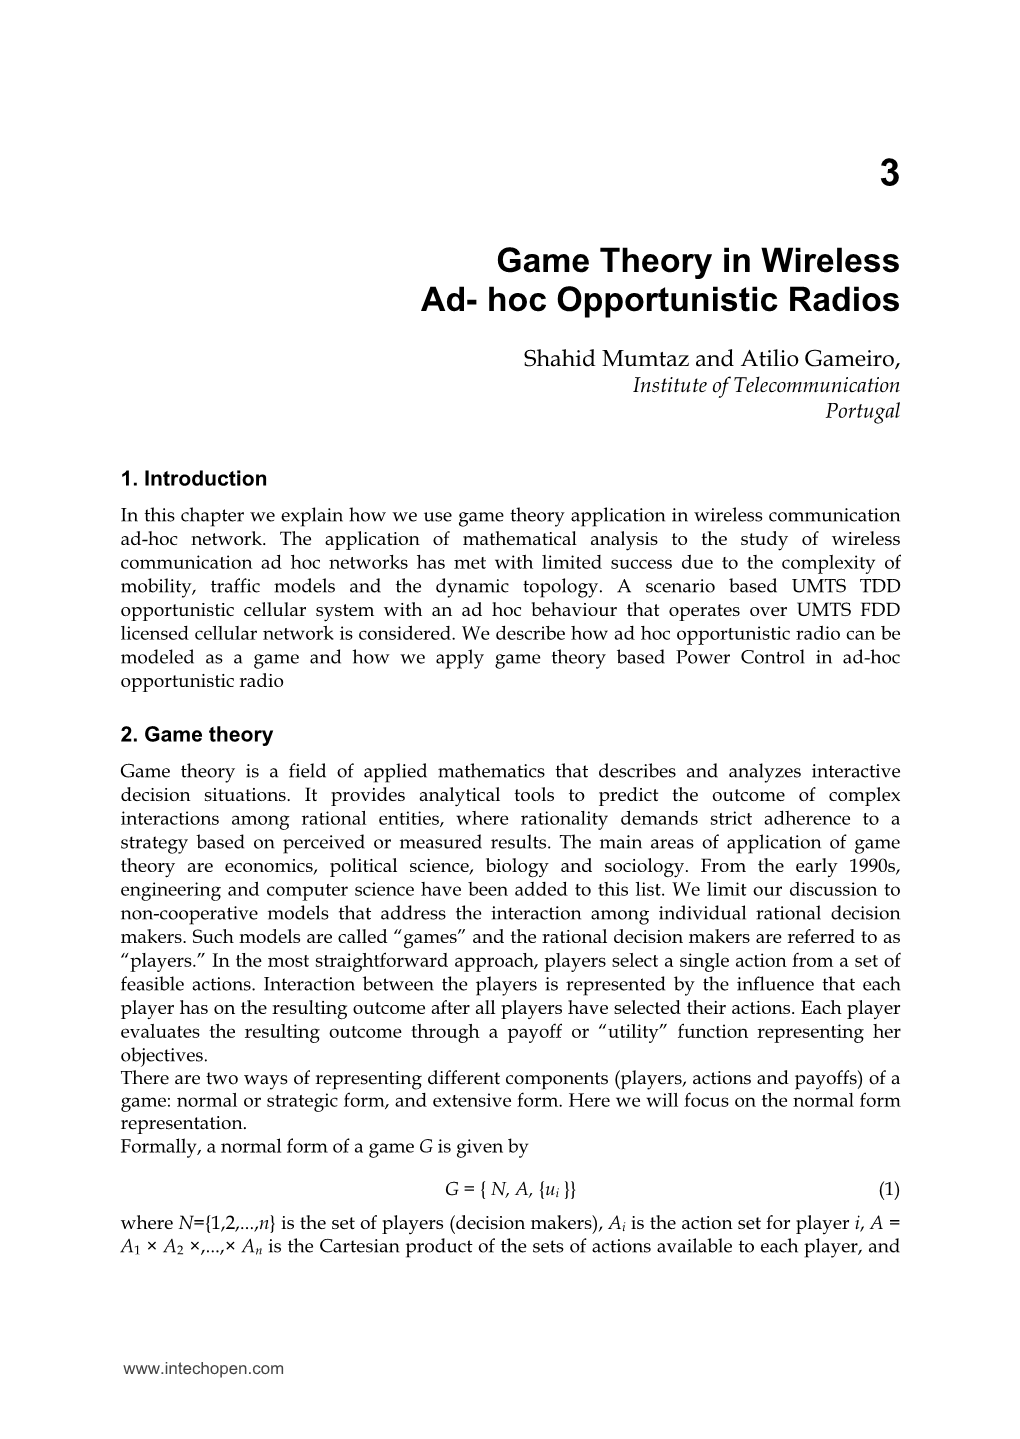 Game Theory in Wireless Ad- Hoc Opportunistic Radios